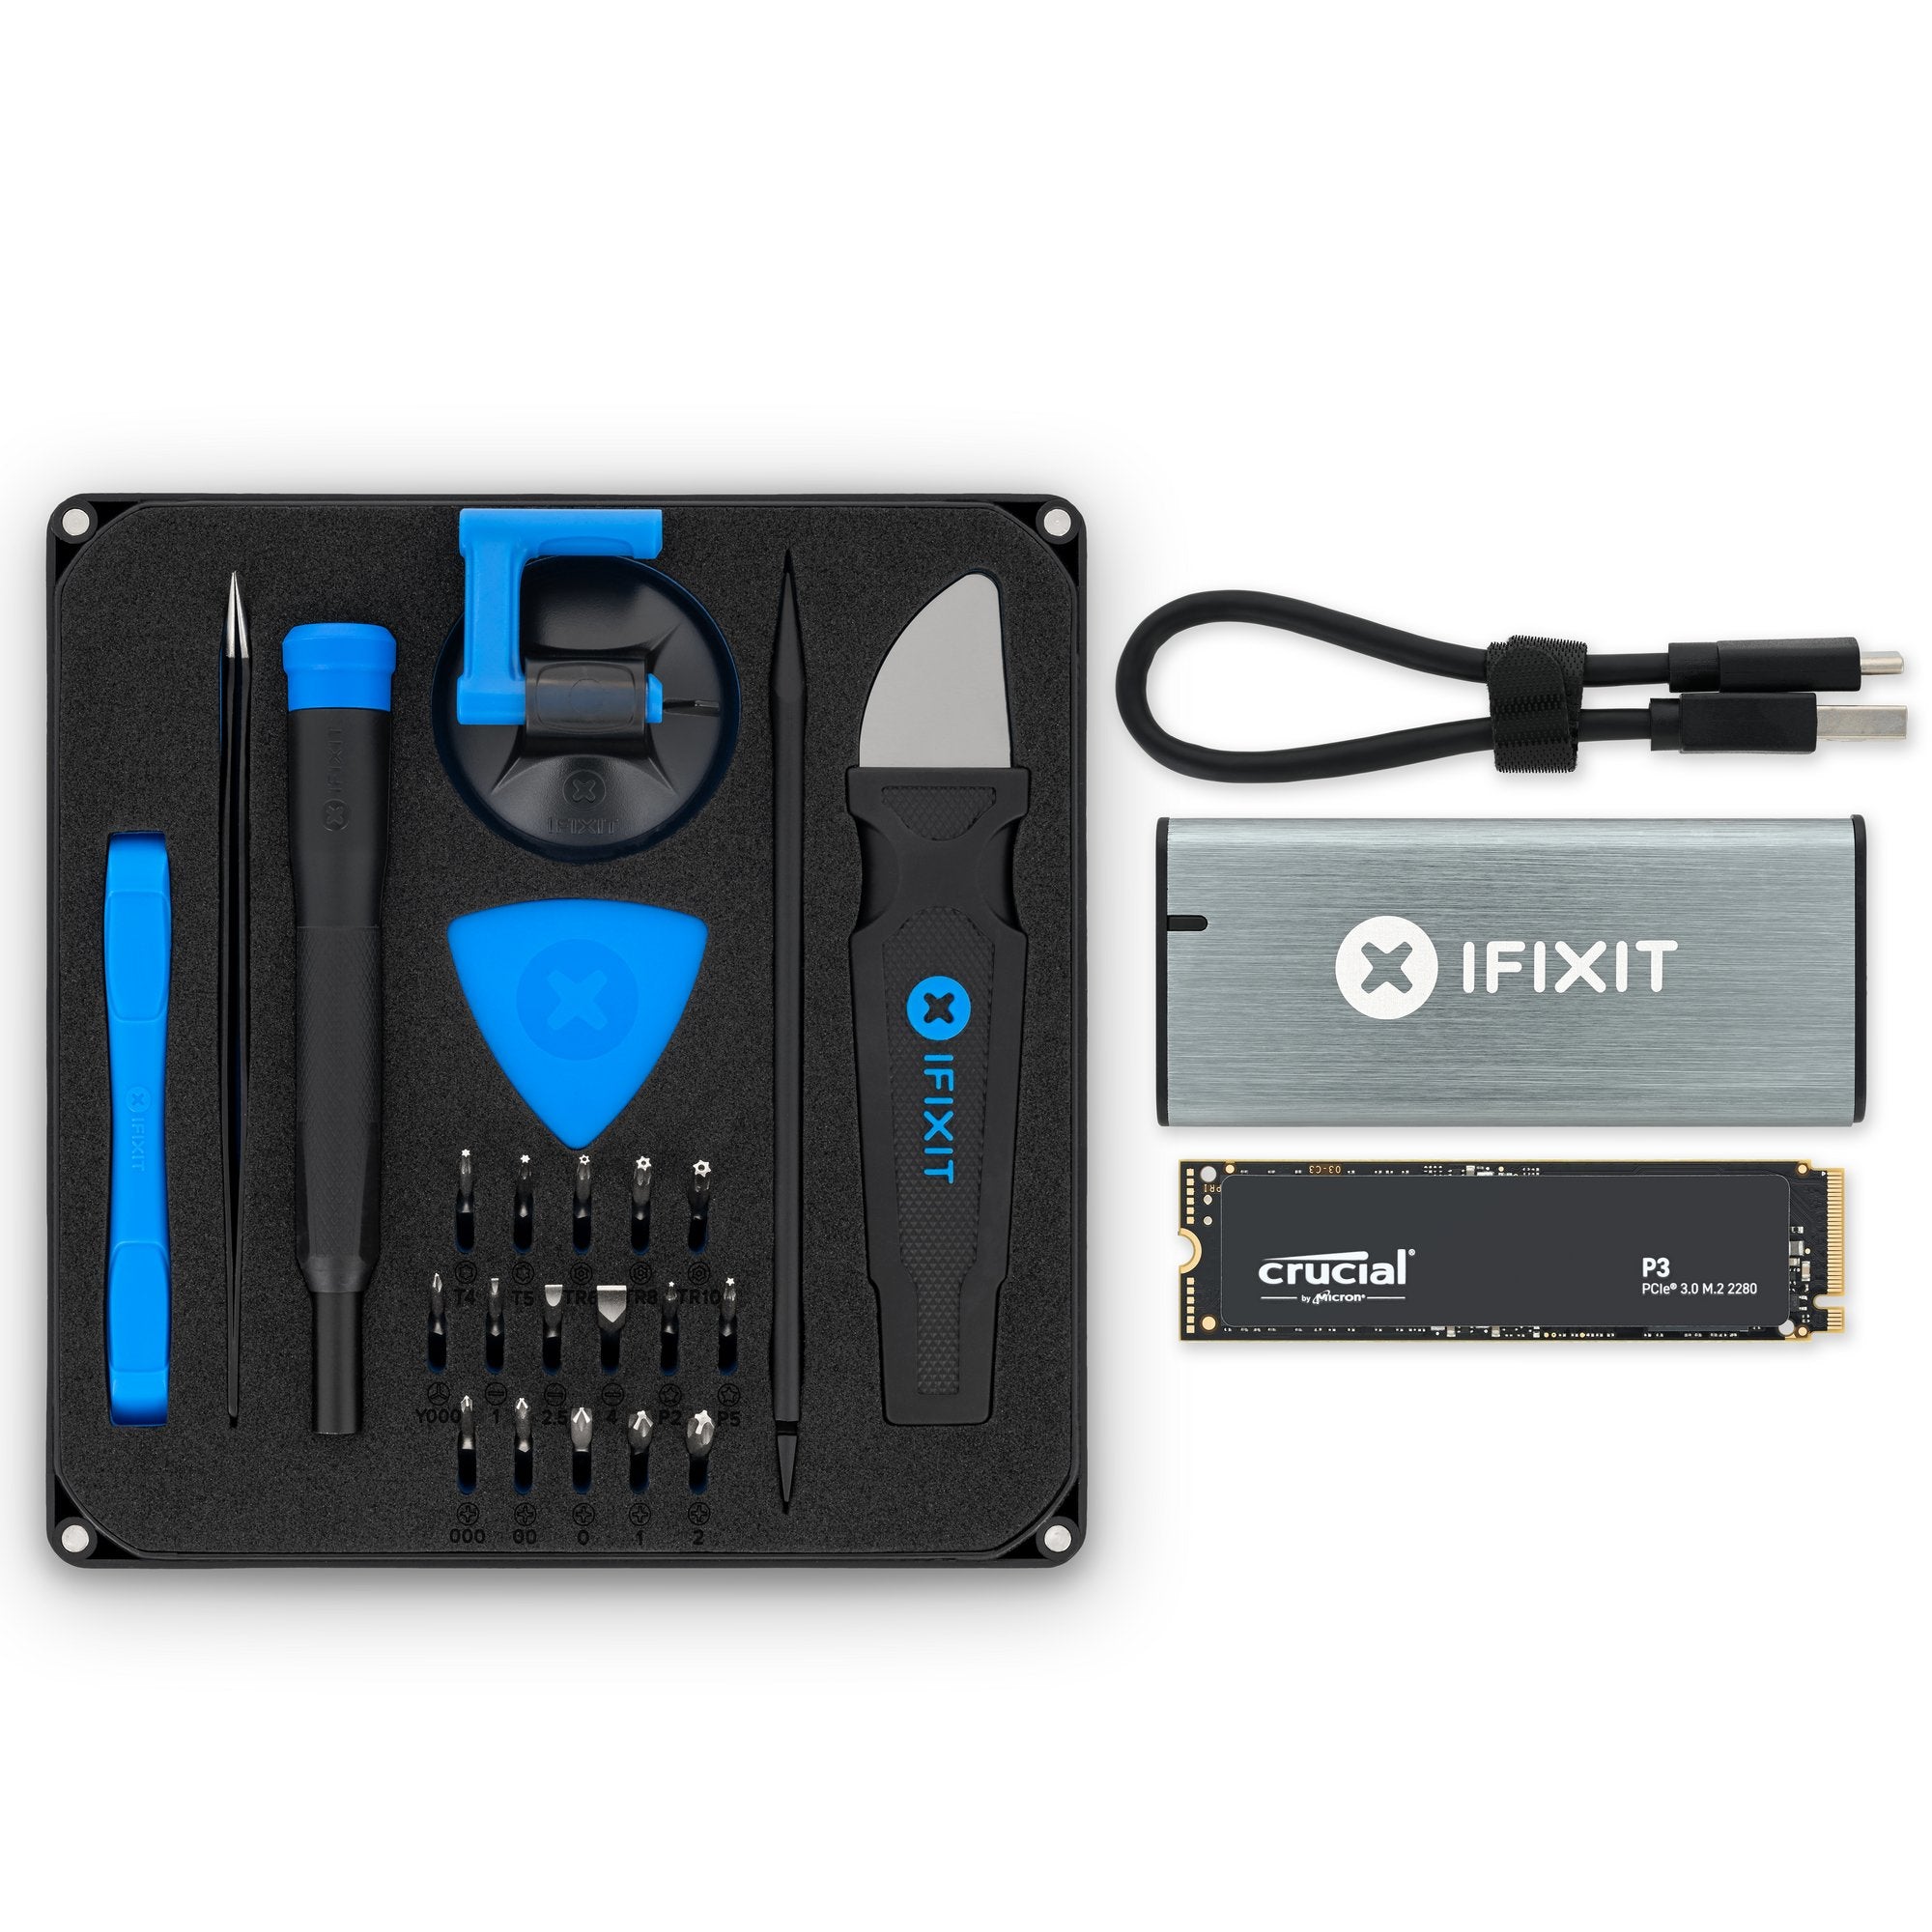 Crucial P3 M.2 2280 SSD—Your complete iFixit Fix Kit: a Crucial SSD, iFixit & Instructions. Two-year Guarantee.